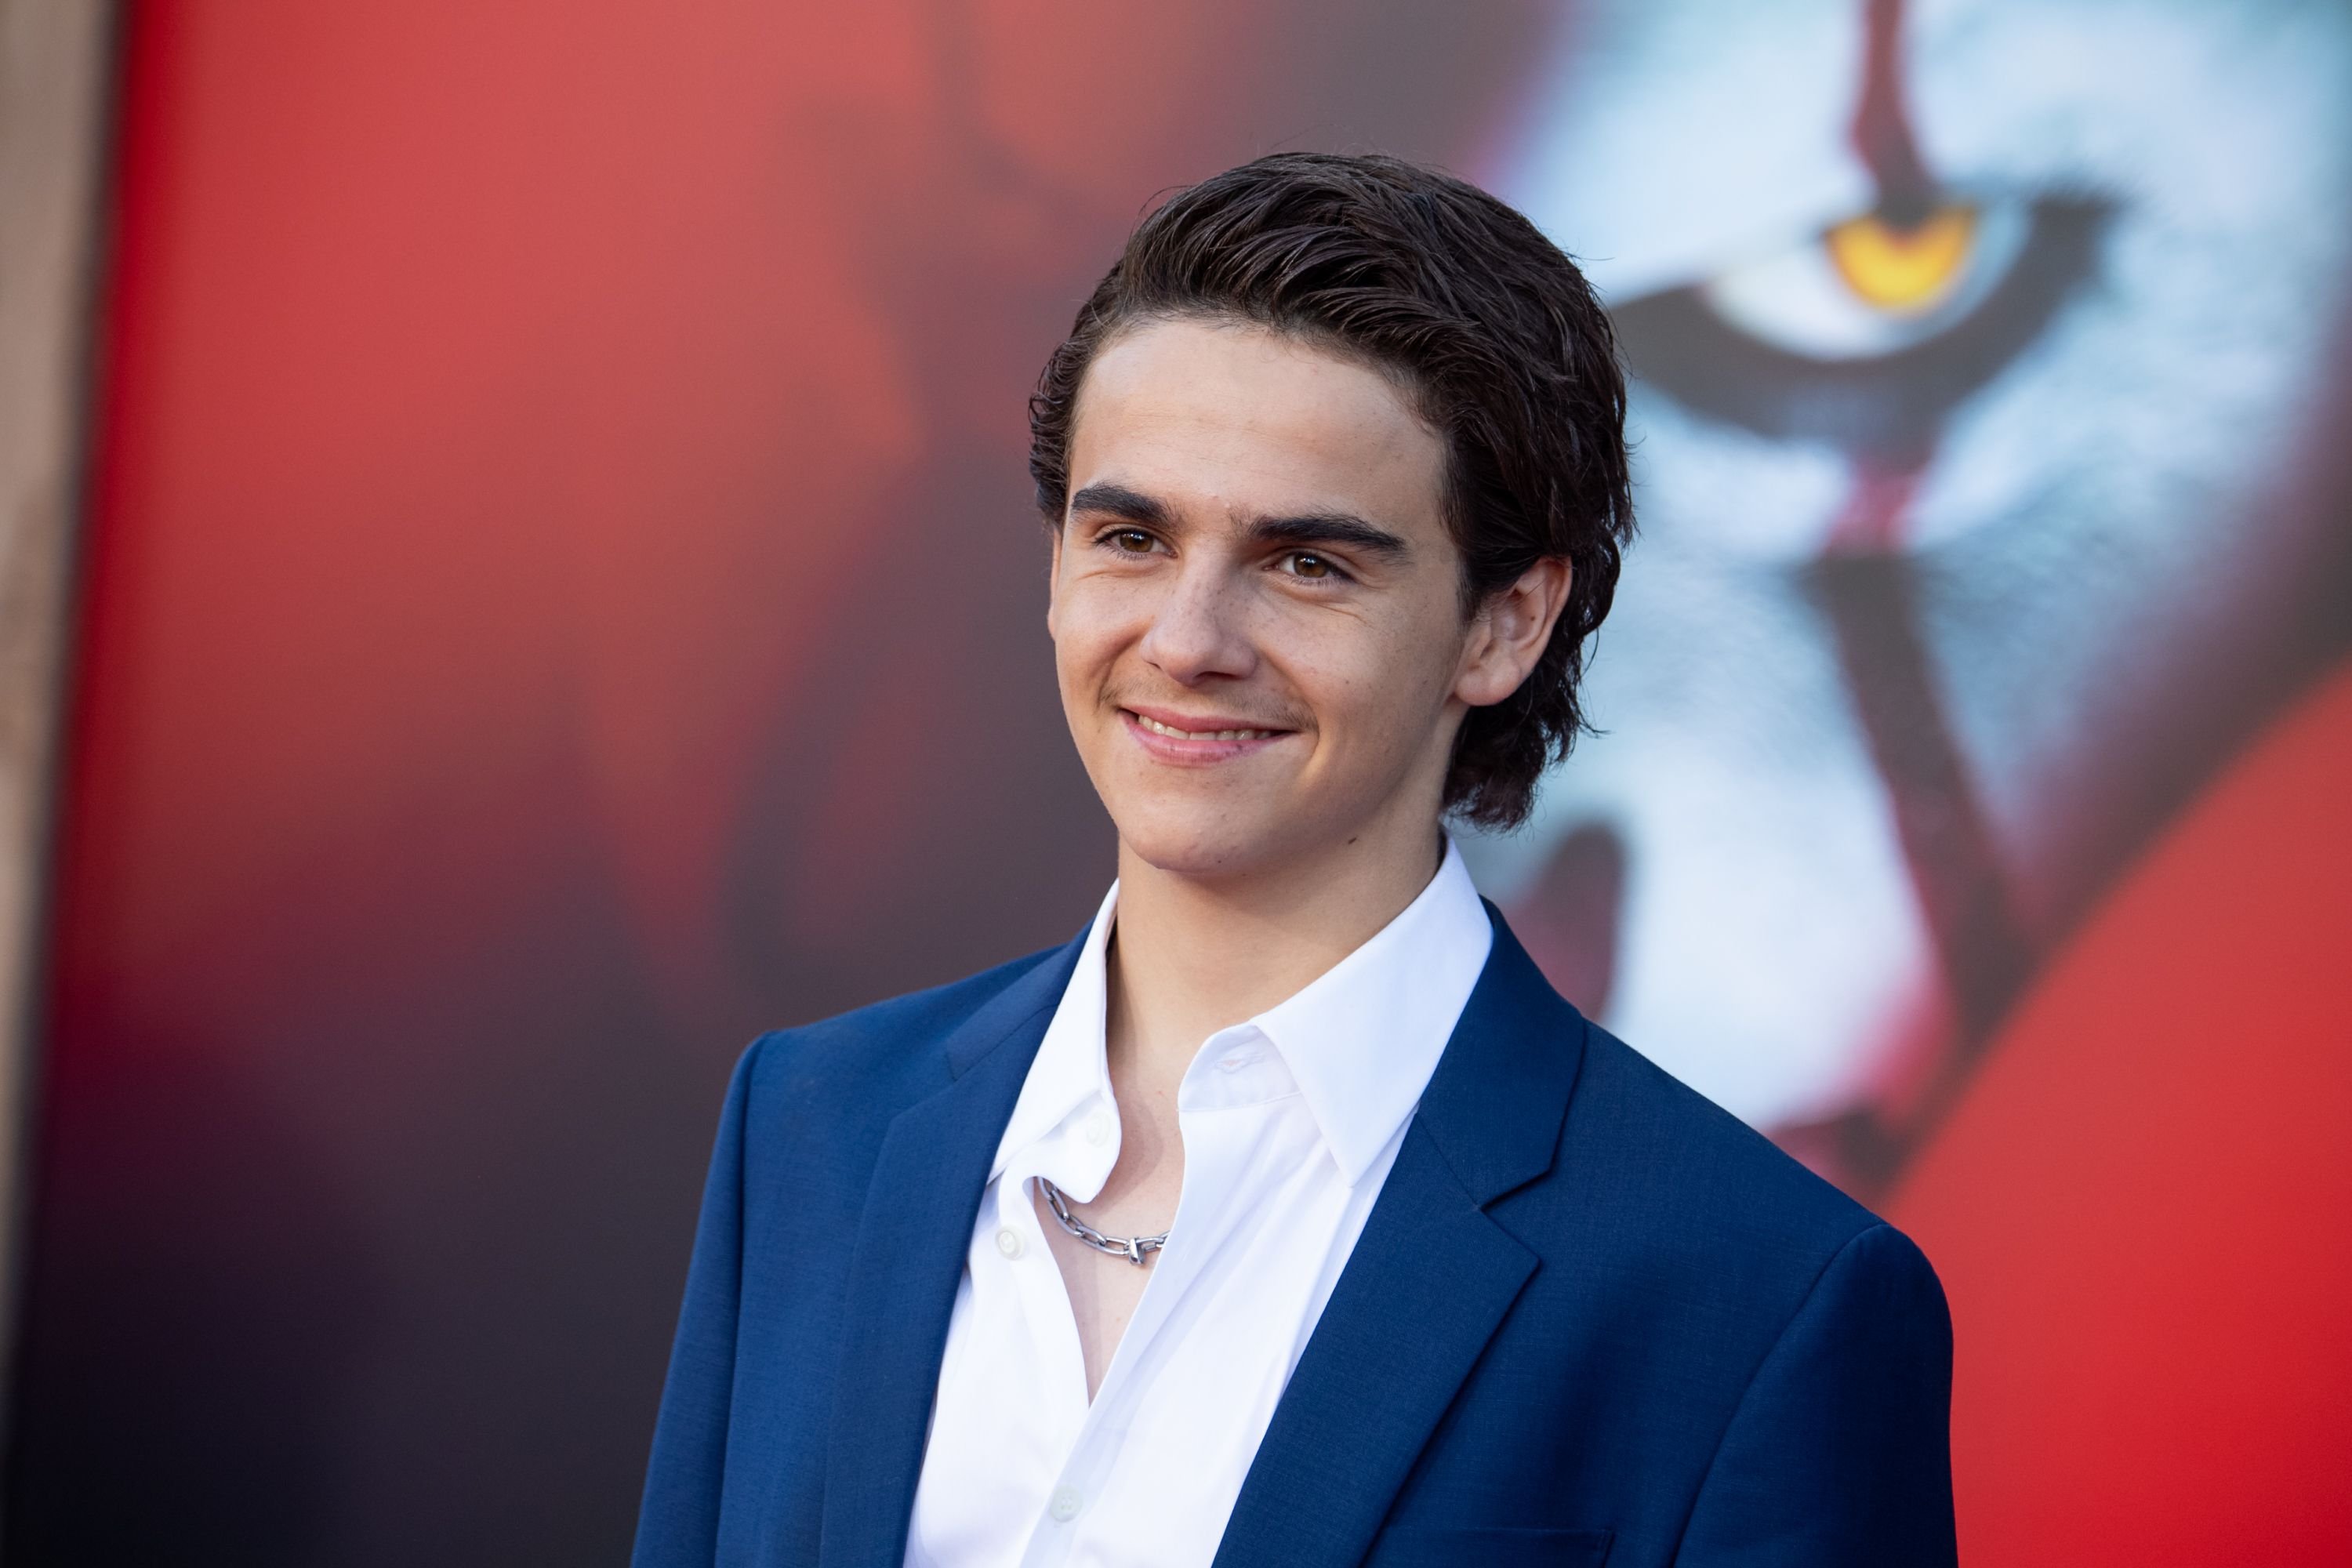 Jack Dylan Grazer at the premiere of "It Chapter Two" in August 2019 in Westwood, California | Source: Getty Images